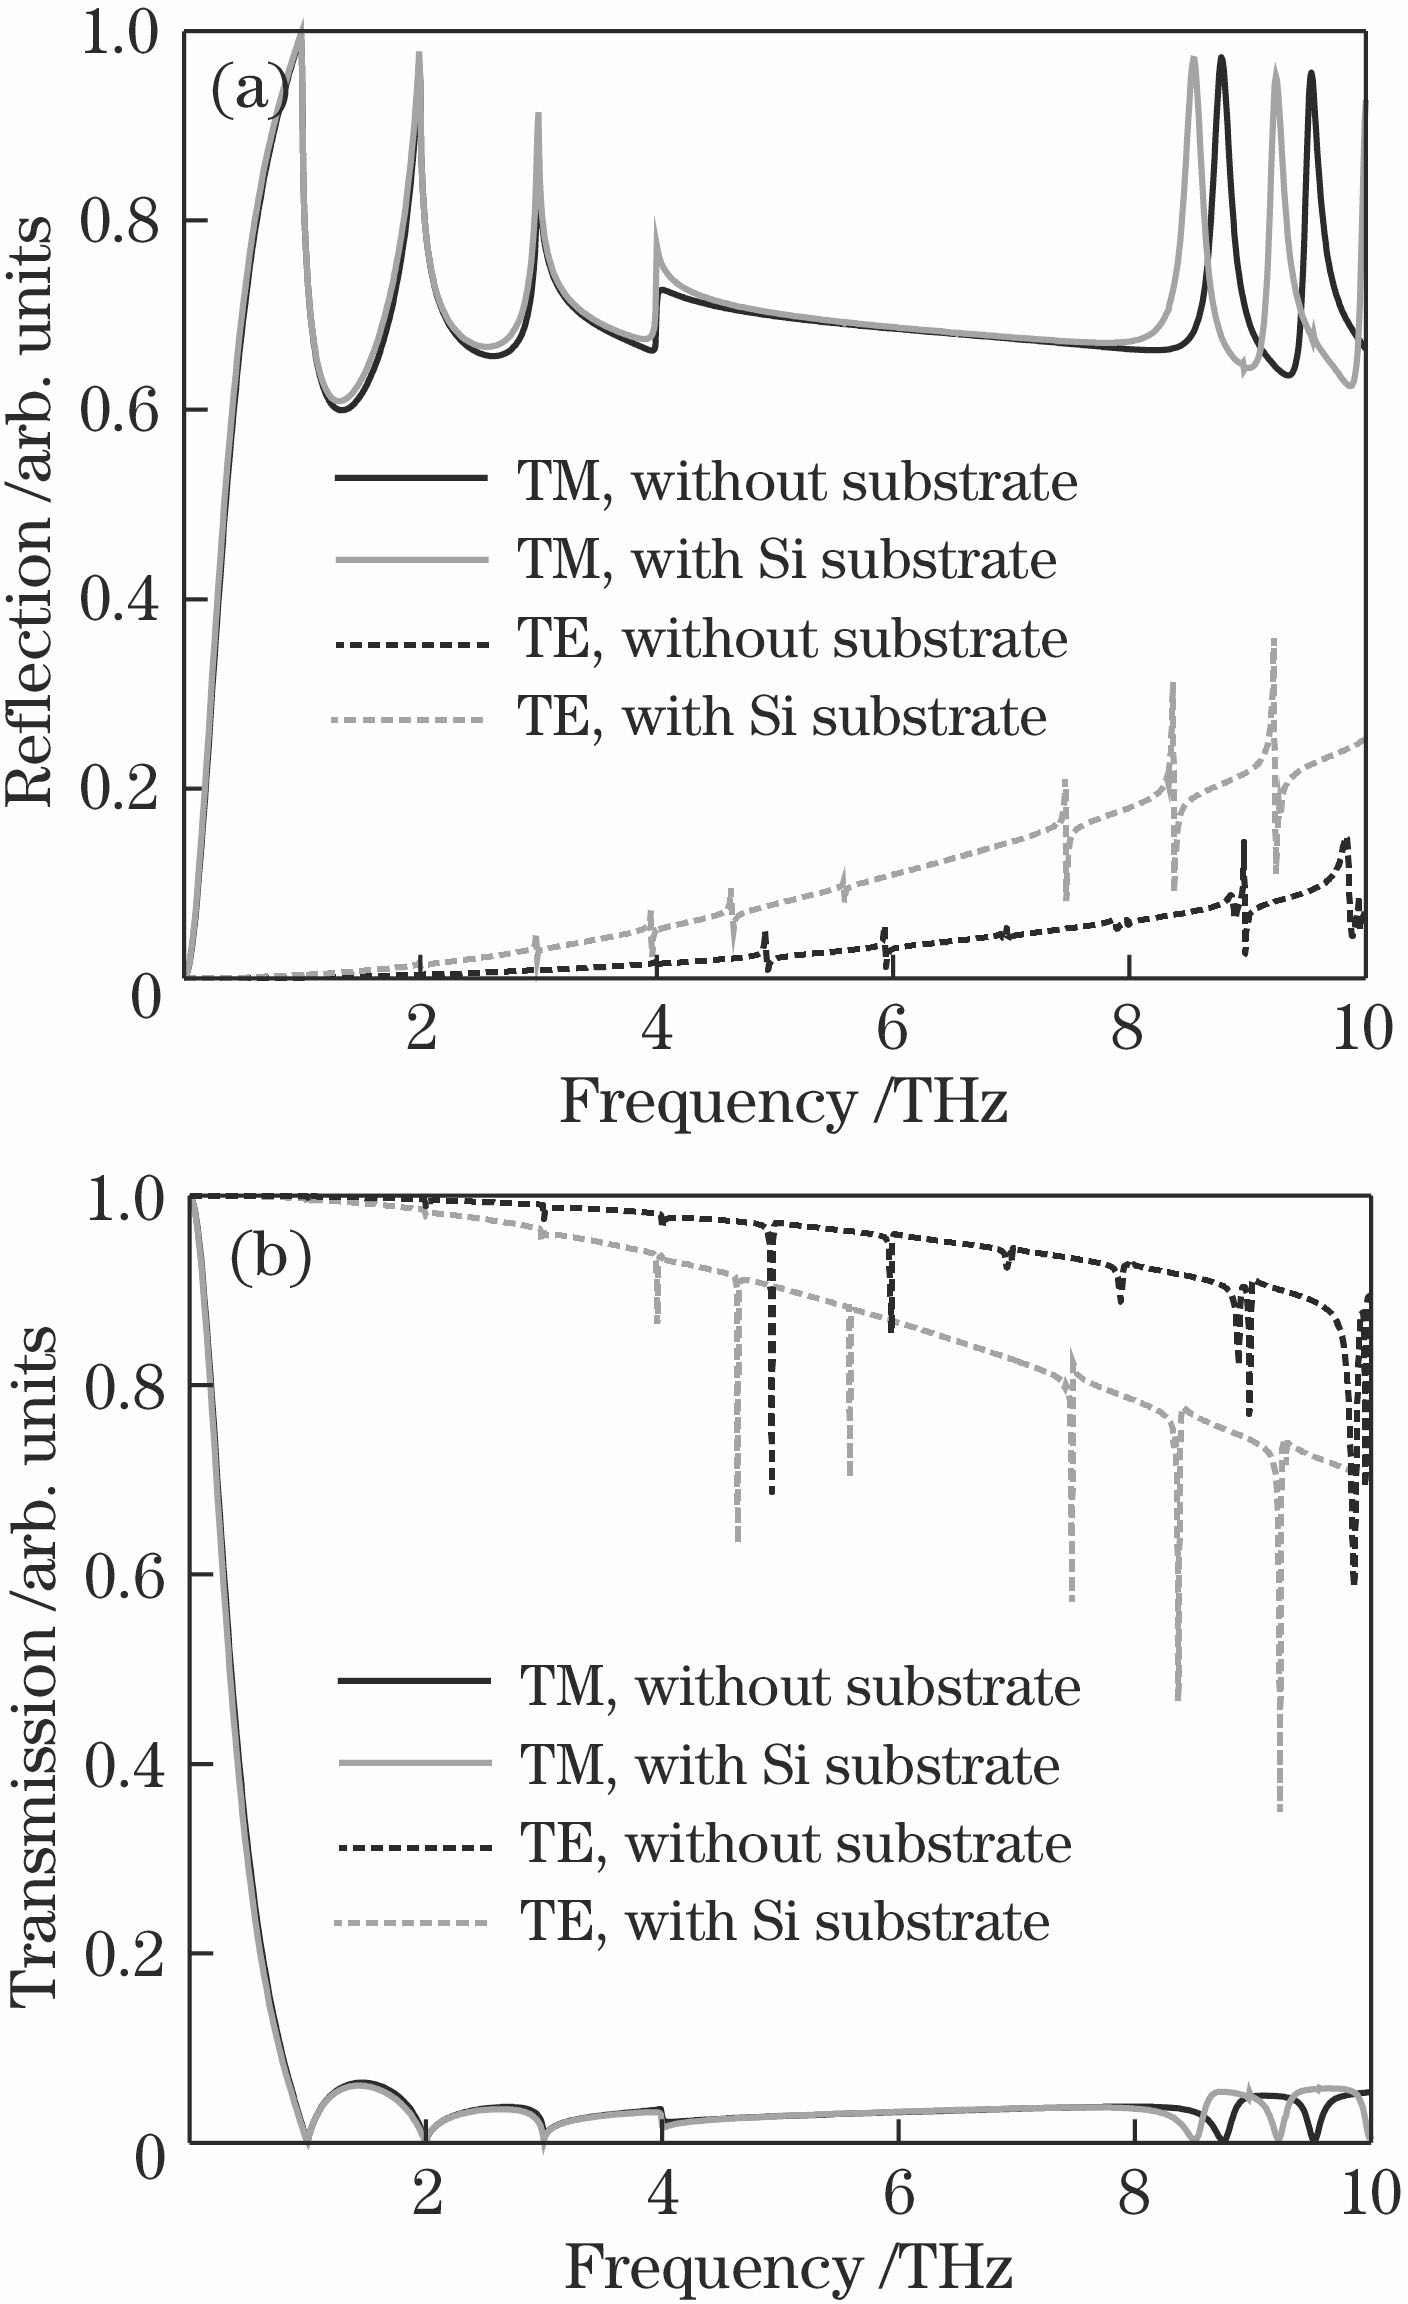 (a) Reflection spectrum lines and (b) transmission spectrum lines for TM/TE mode of metal array with and without Si substrate when the parameters of the array are Px=10 μm, ax=5 μm, Py=300 μm, and ay=250 μm